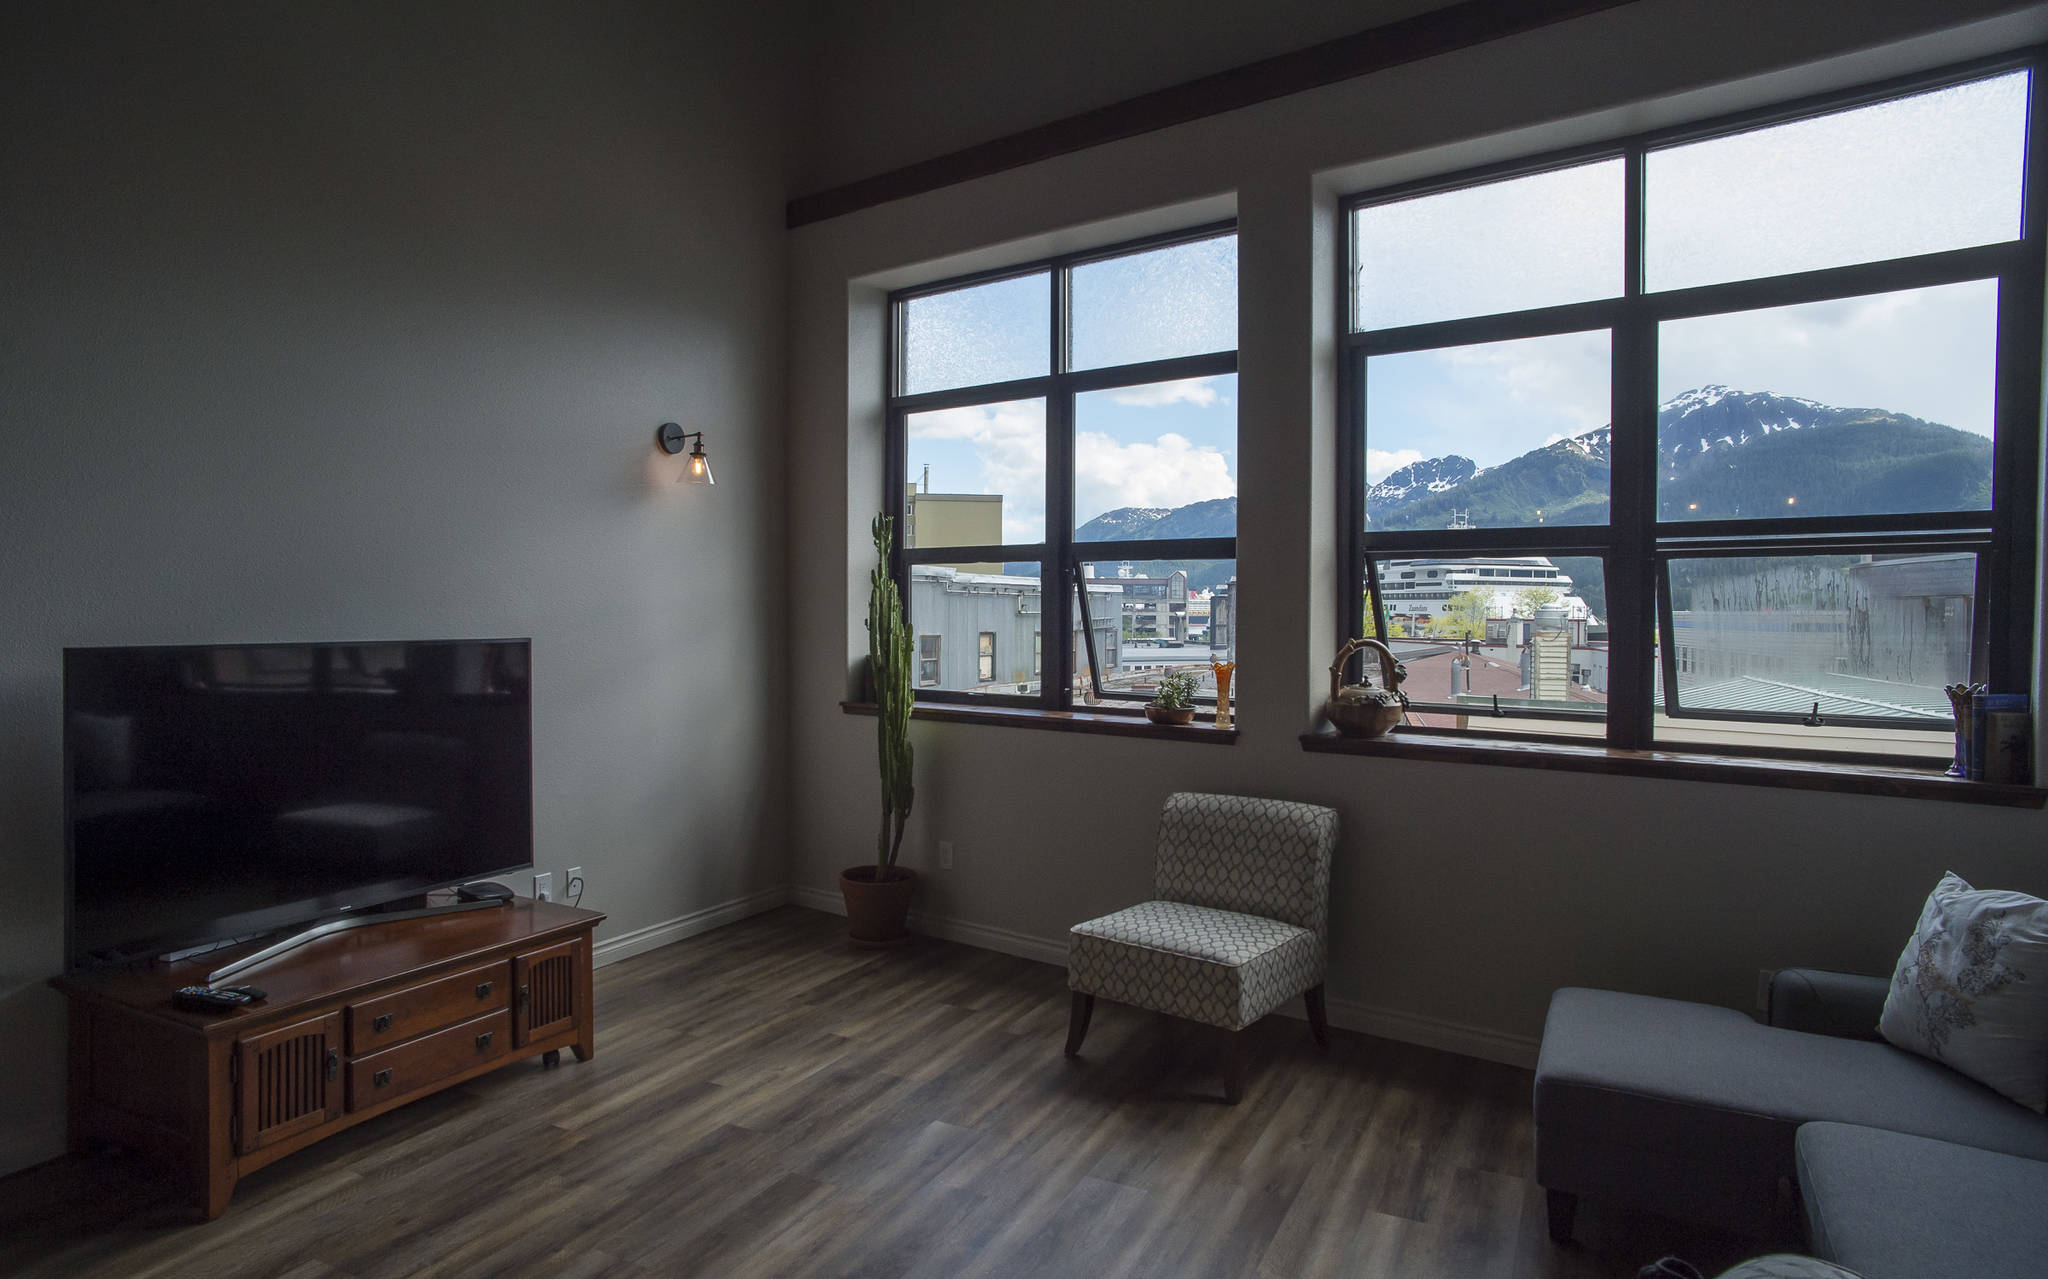 Livingroom view from the Hellenthal Lofts on Front Street on Friday, June 8, 2018. (Michael Penn | Juneau Empire)